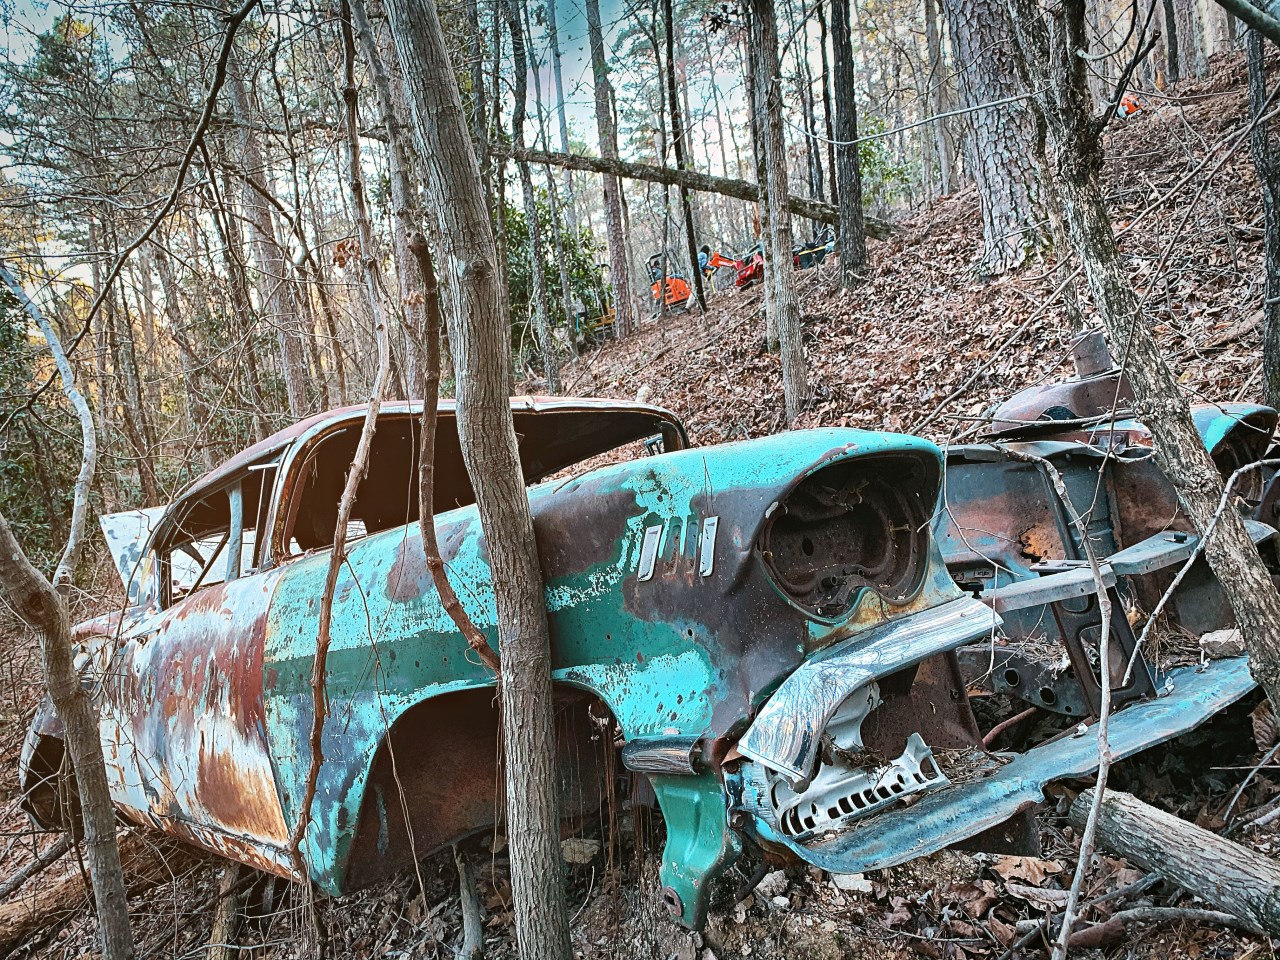 "Artifacts like this car body were located along the National Park Service property. During the build process, Trail Solutions worked around these artifacts, providing interesting points of interest as riders enter into the main Northwoods system."